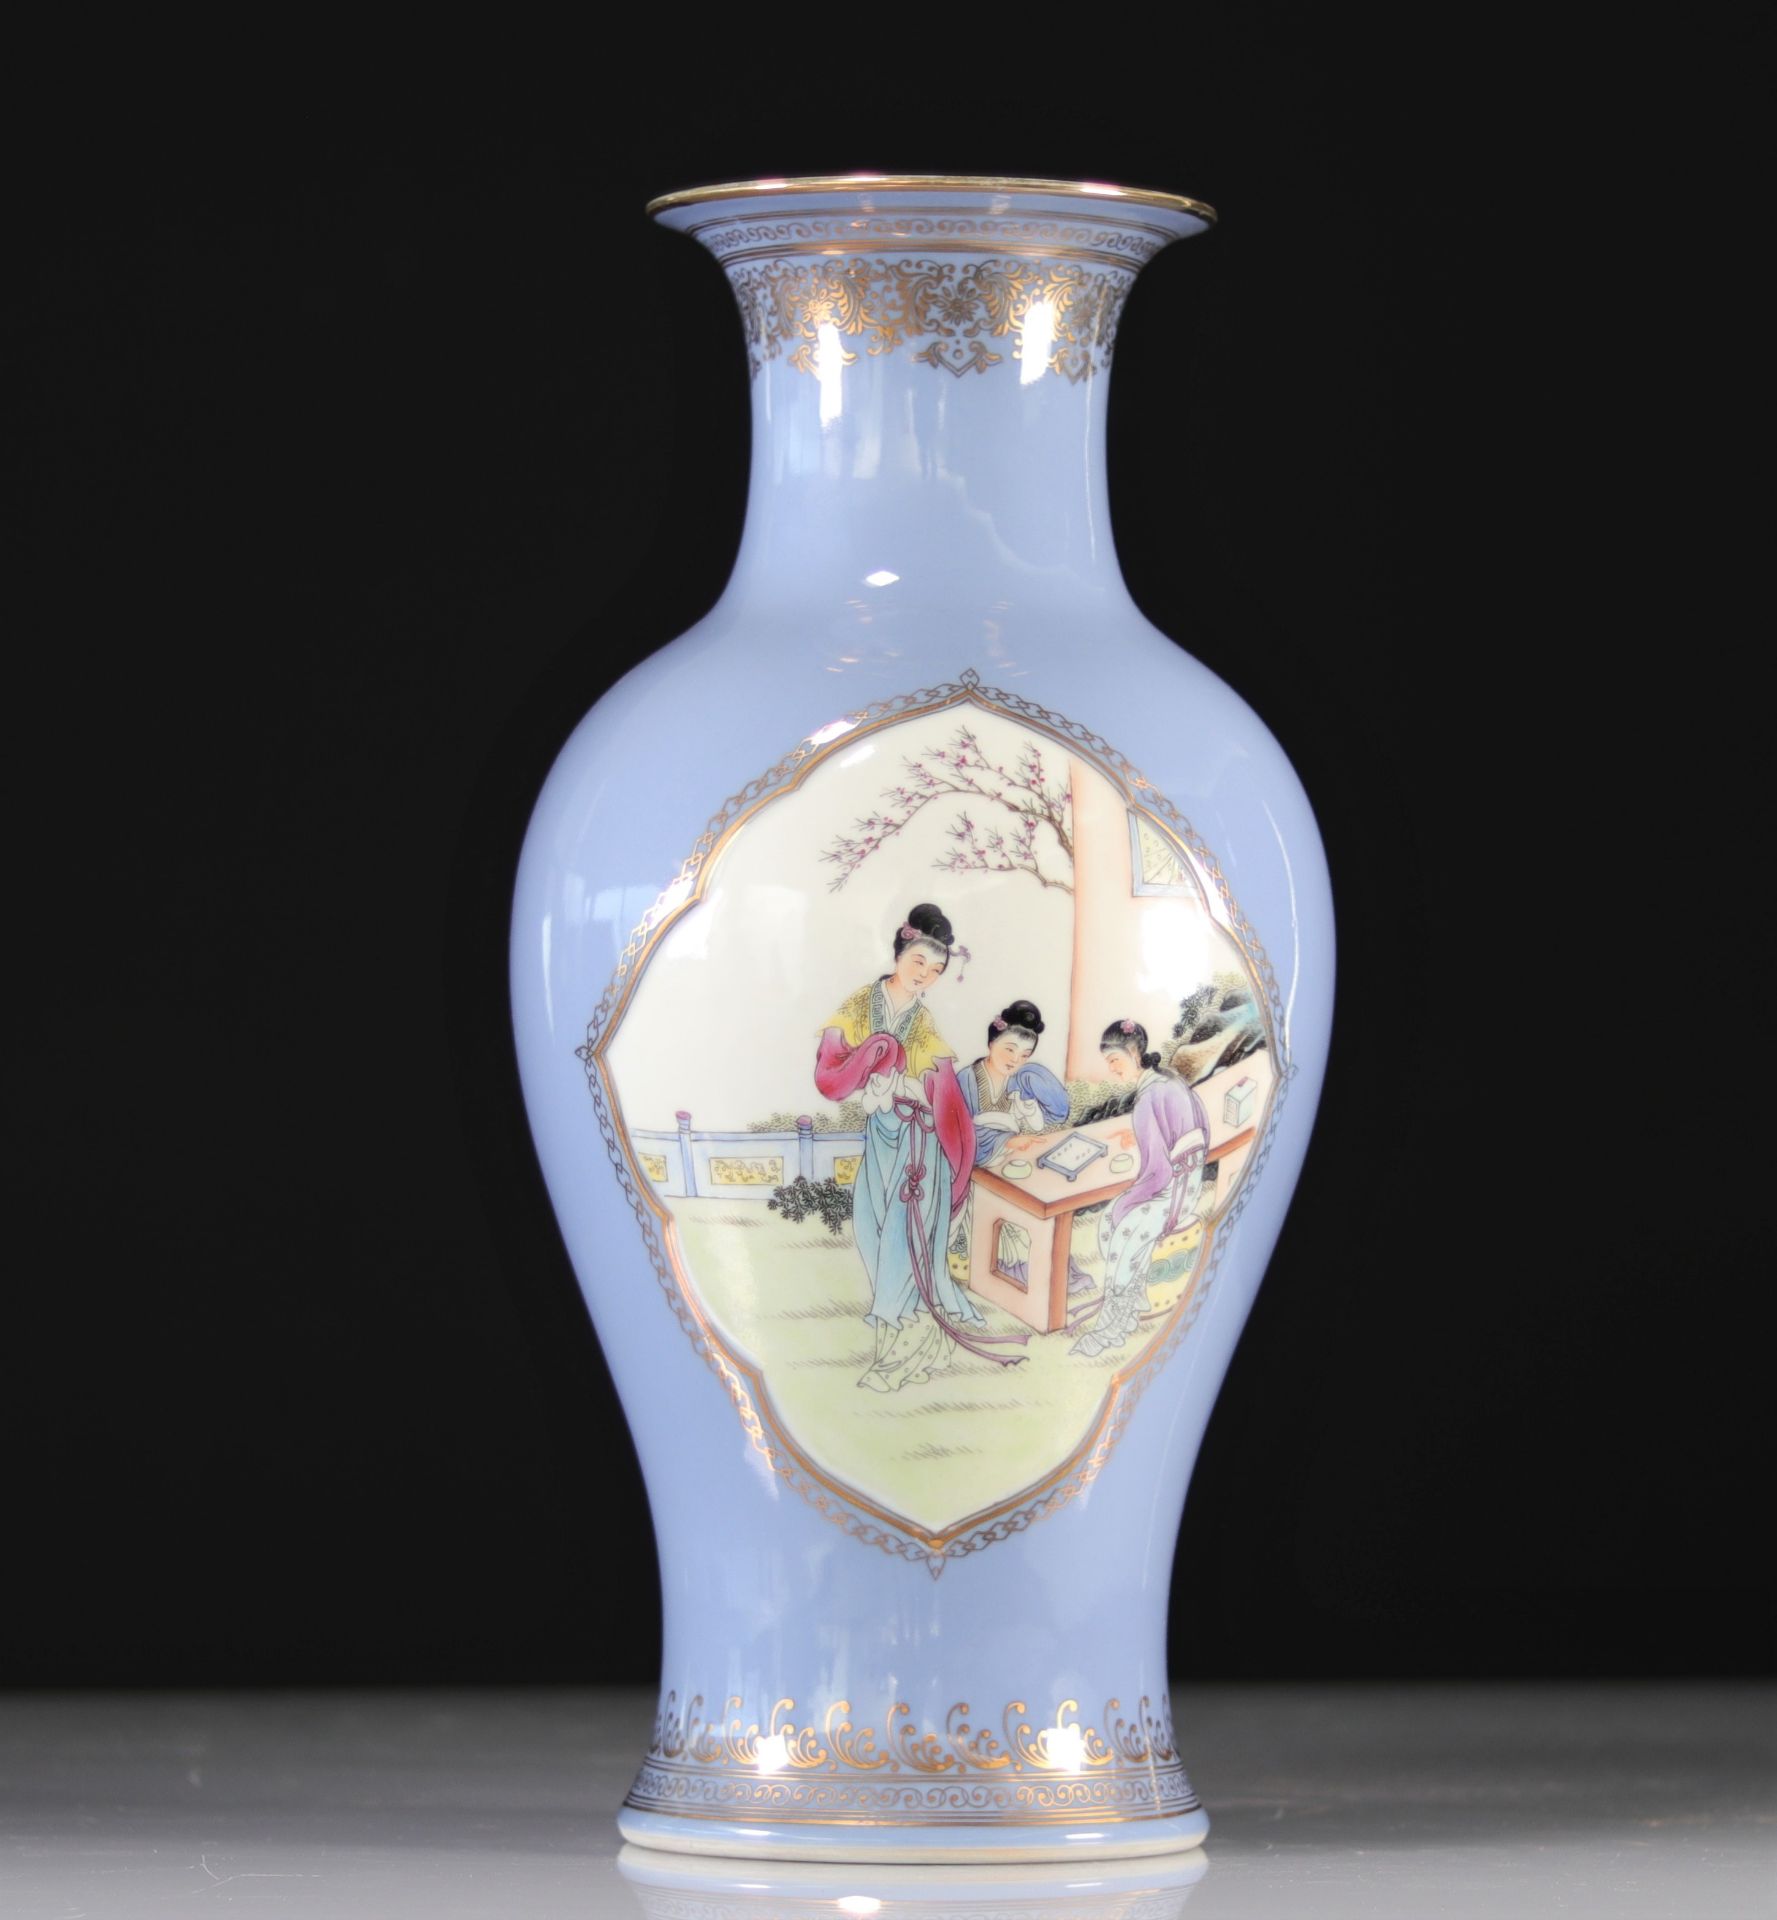 Family rose vase lavender blue background and gold double cartridges Qianlong brand - Image 2 of 5